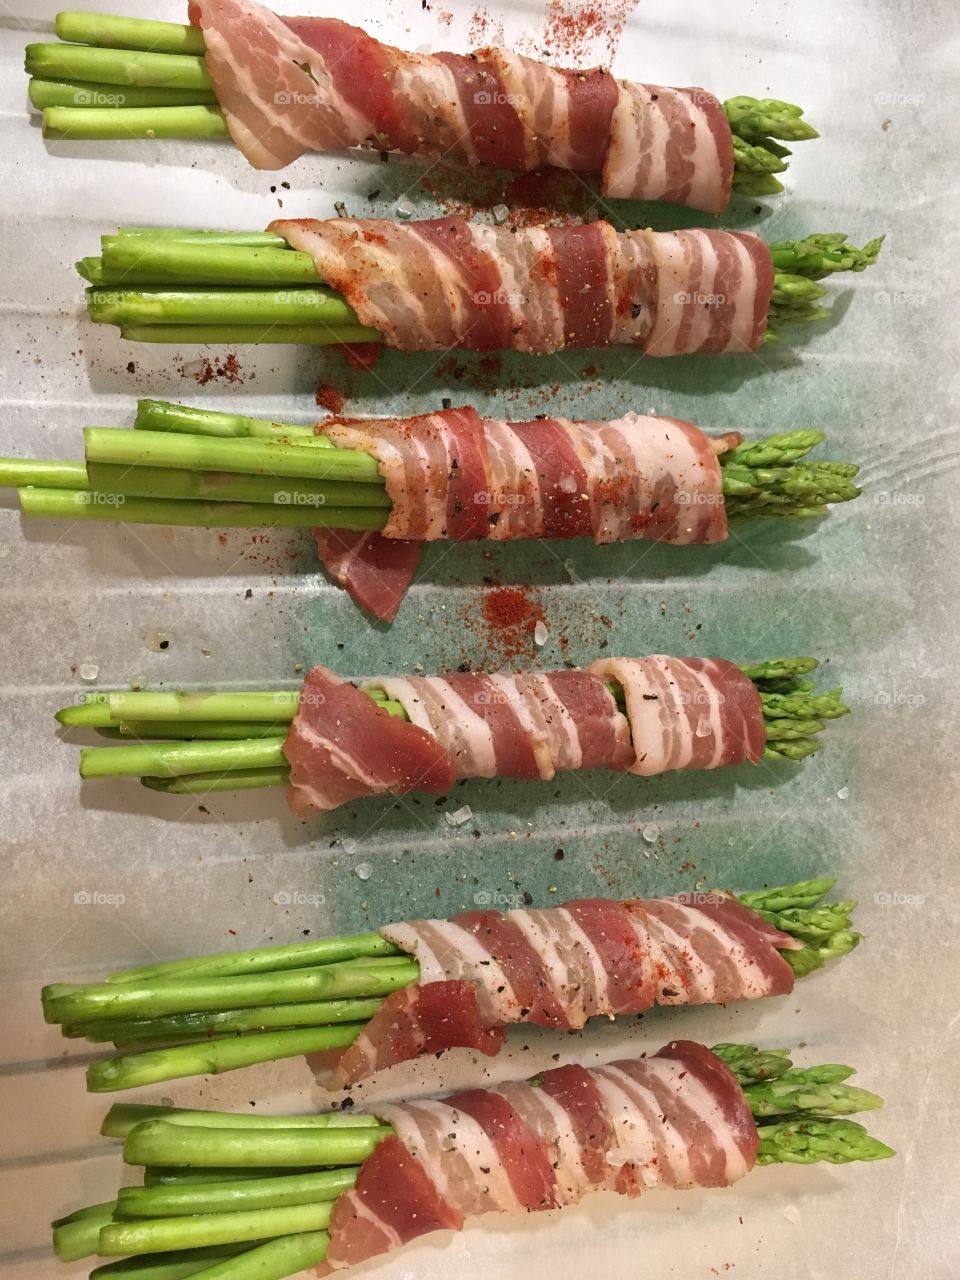 Asparagus wrap in bacon? Yes please! 